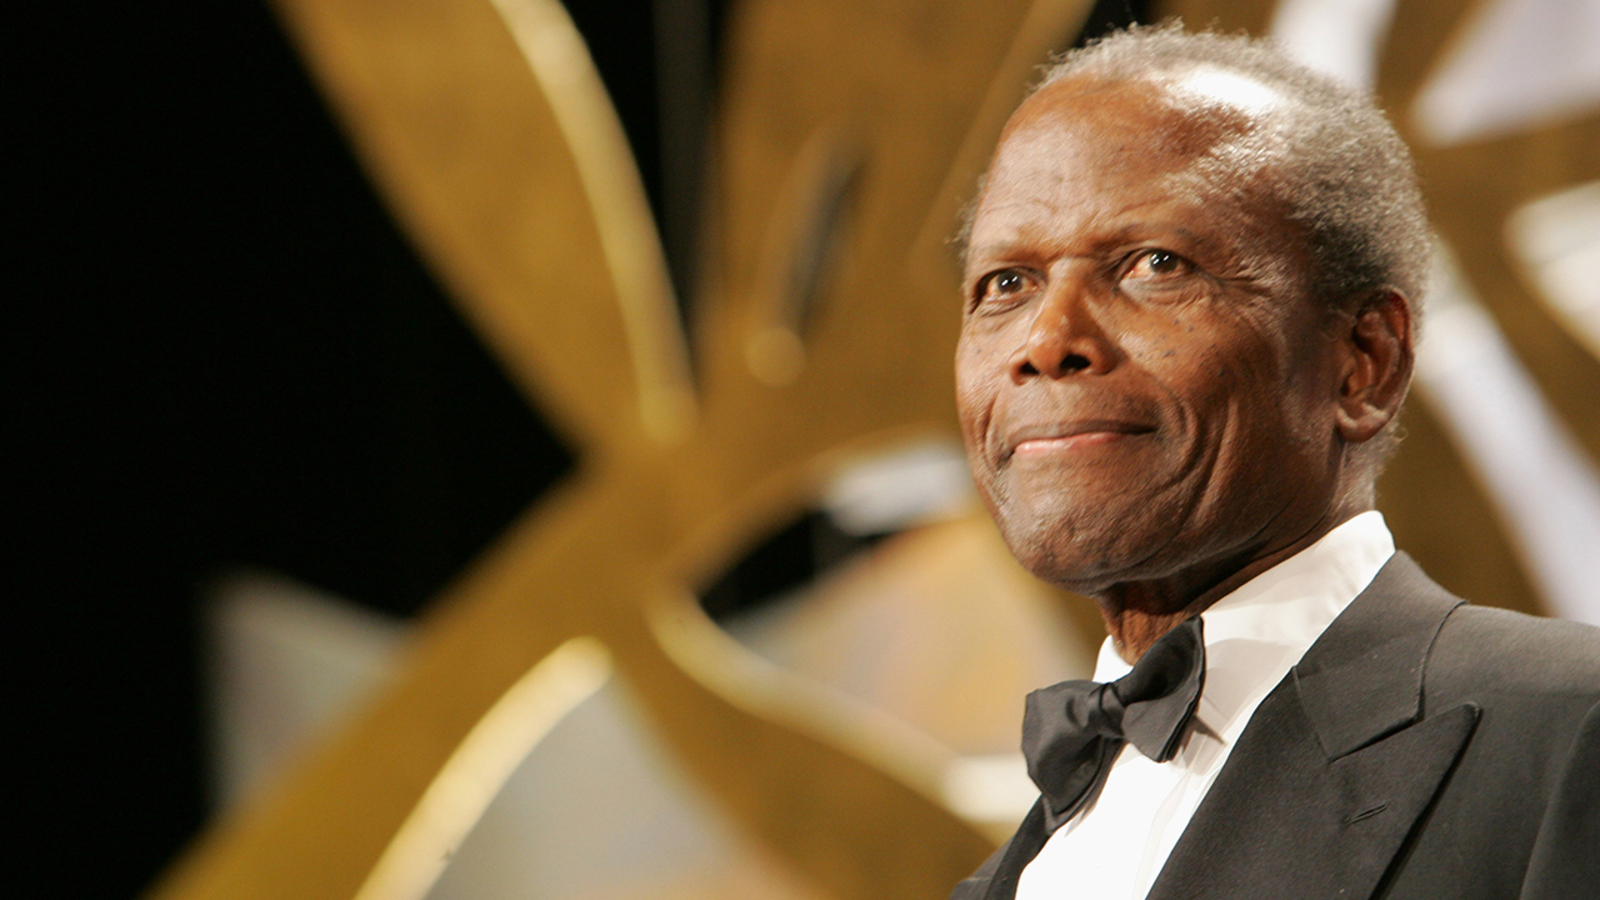 Sidney Poitier wearing a bow tie and suit on stage